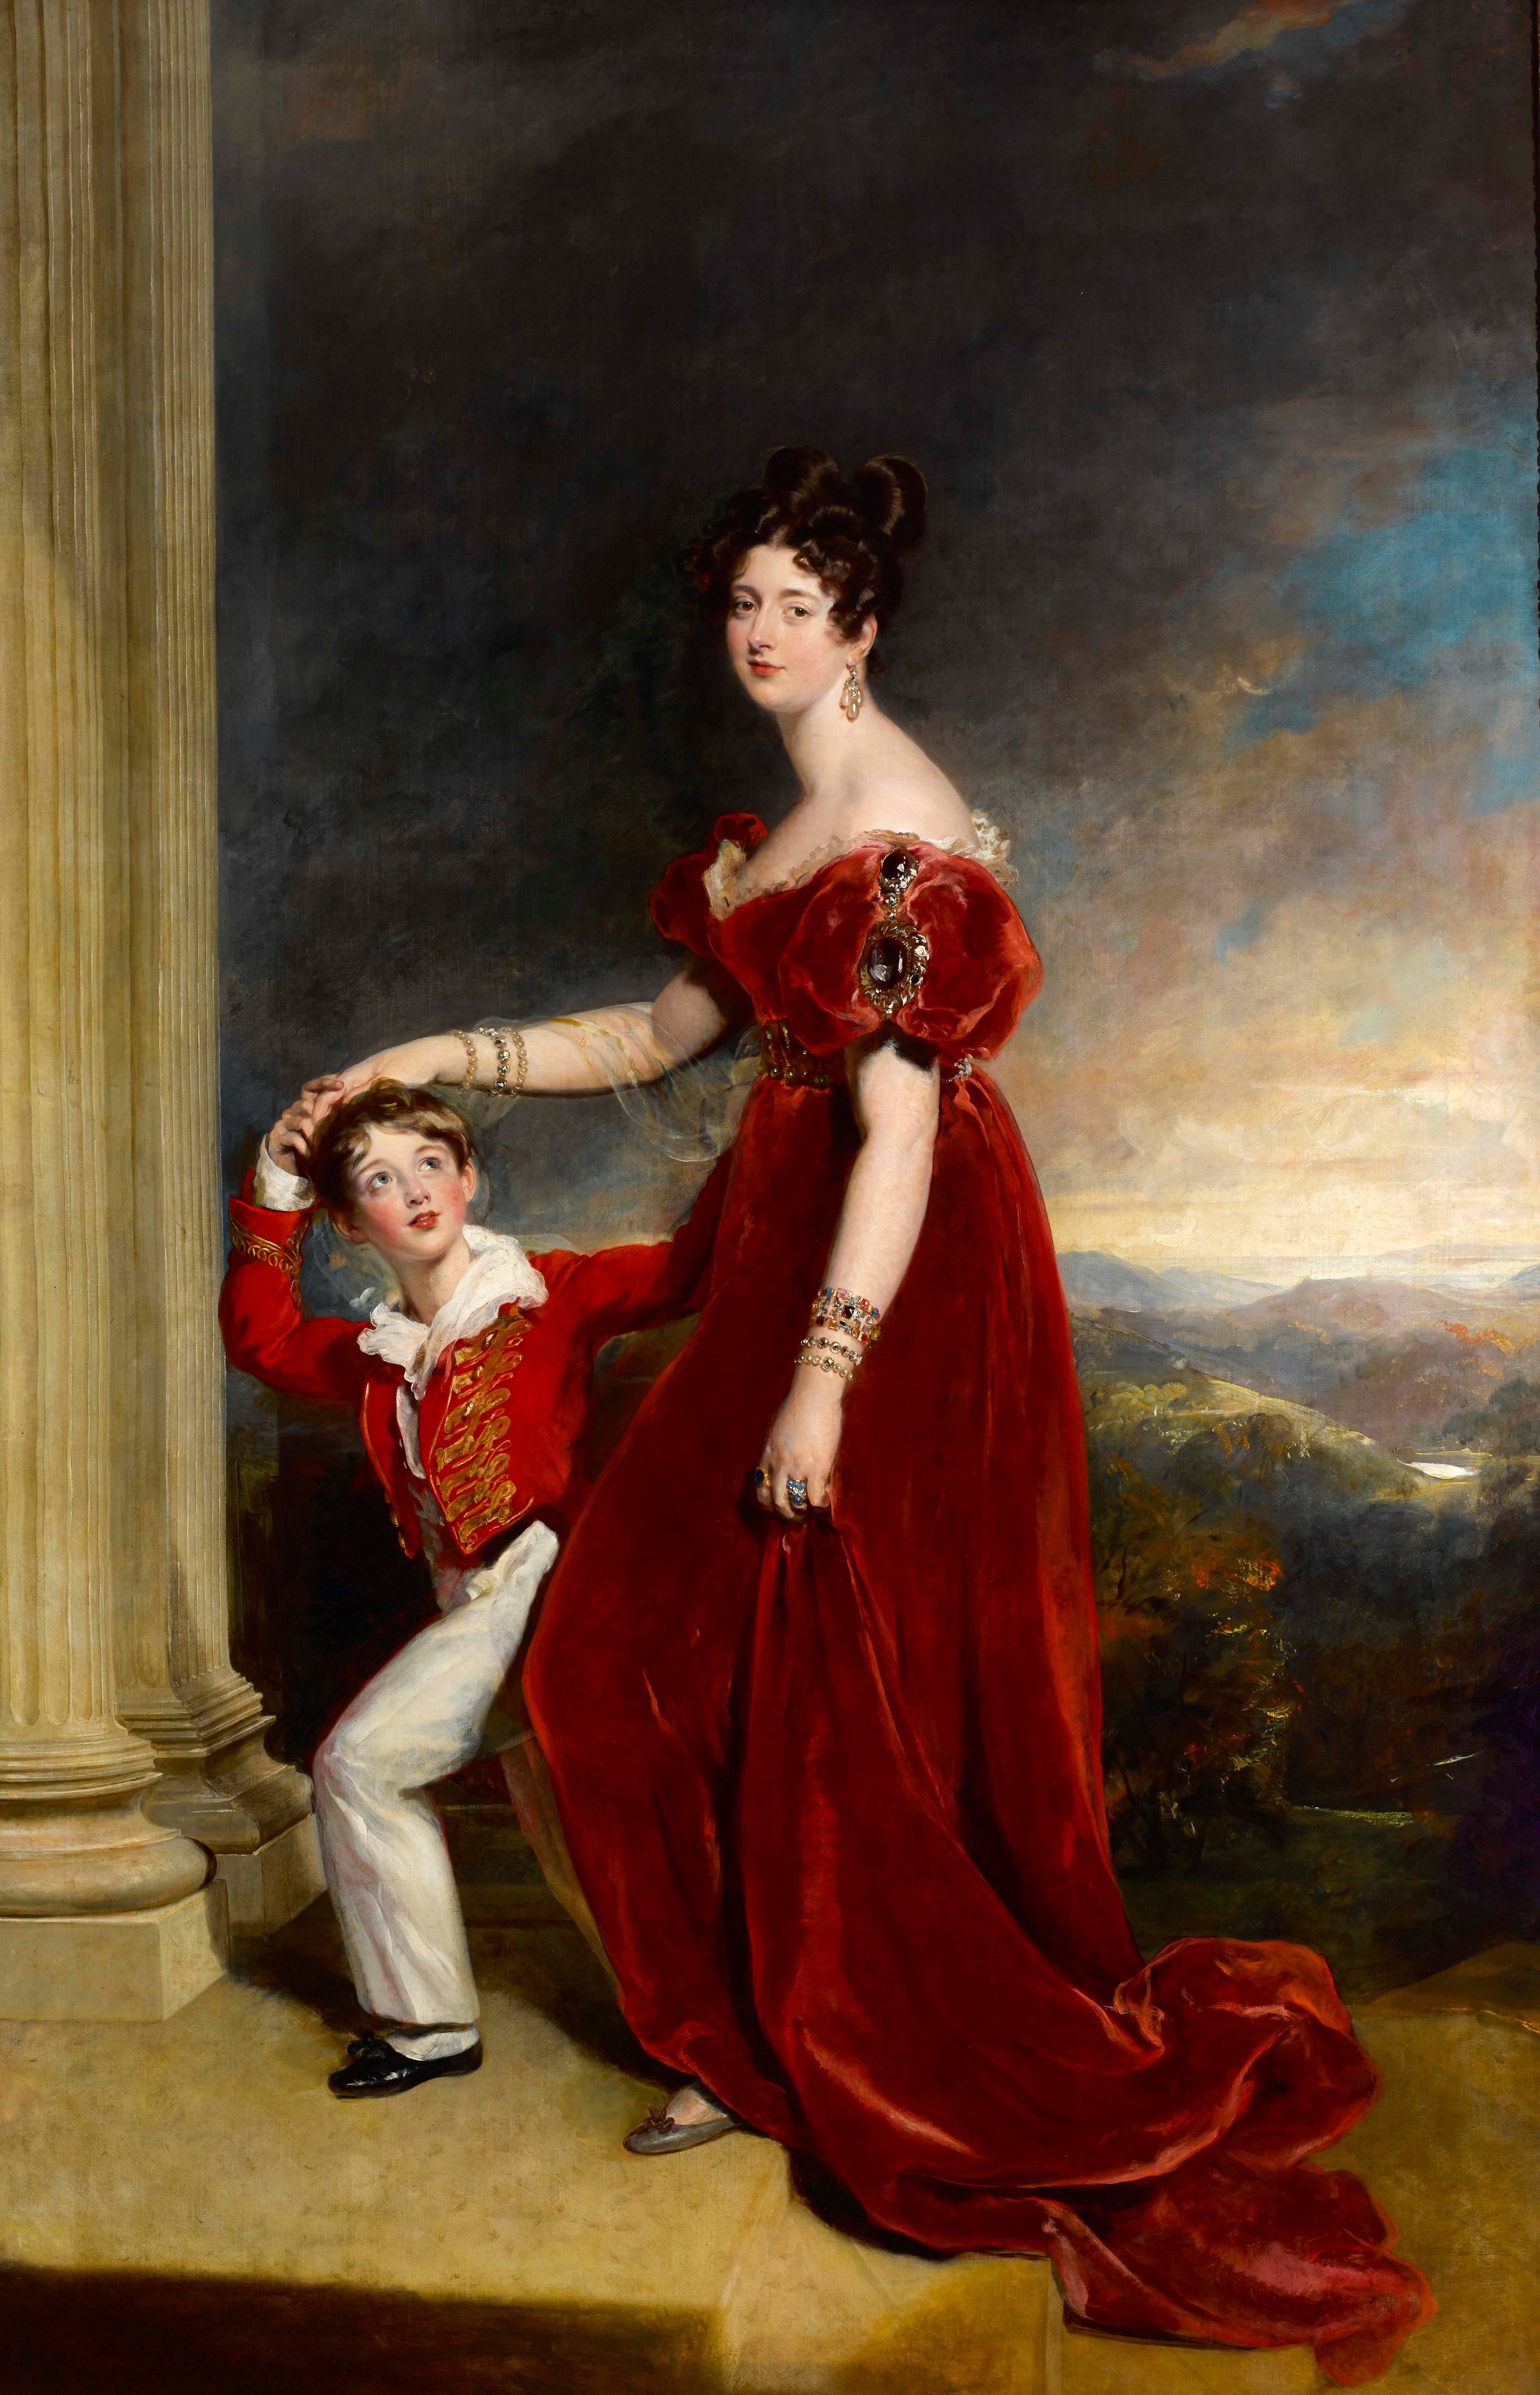 Lady Frances Anne Emily Vane-Tempest, Marchioness of Londonderry (1800-1865) and her son George Henry Robert Charles William Vane-Tempest, Viscount Seaham, later 5th Marquess of Londonderry (1821-1884) by Sir Thomas Lawrence, PRA (1769–1830), 1828. Mount Stewart, co Down, Northern Ireland © National Trust / Bryan Rutledge